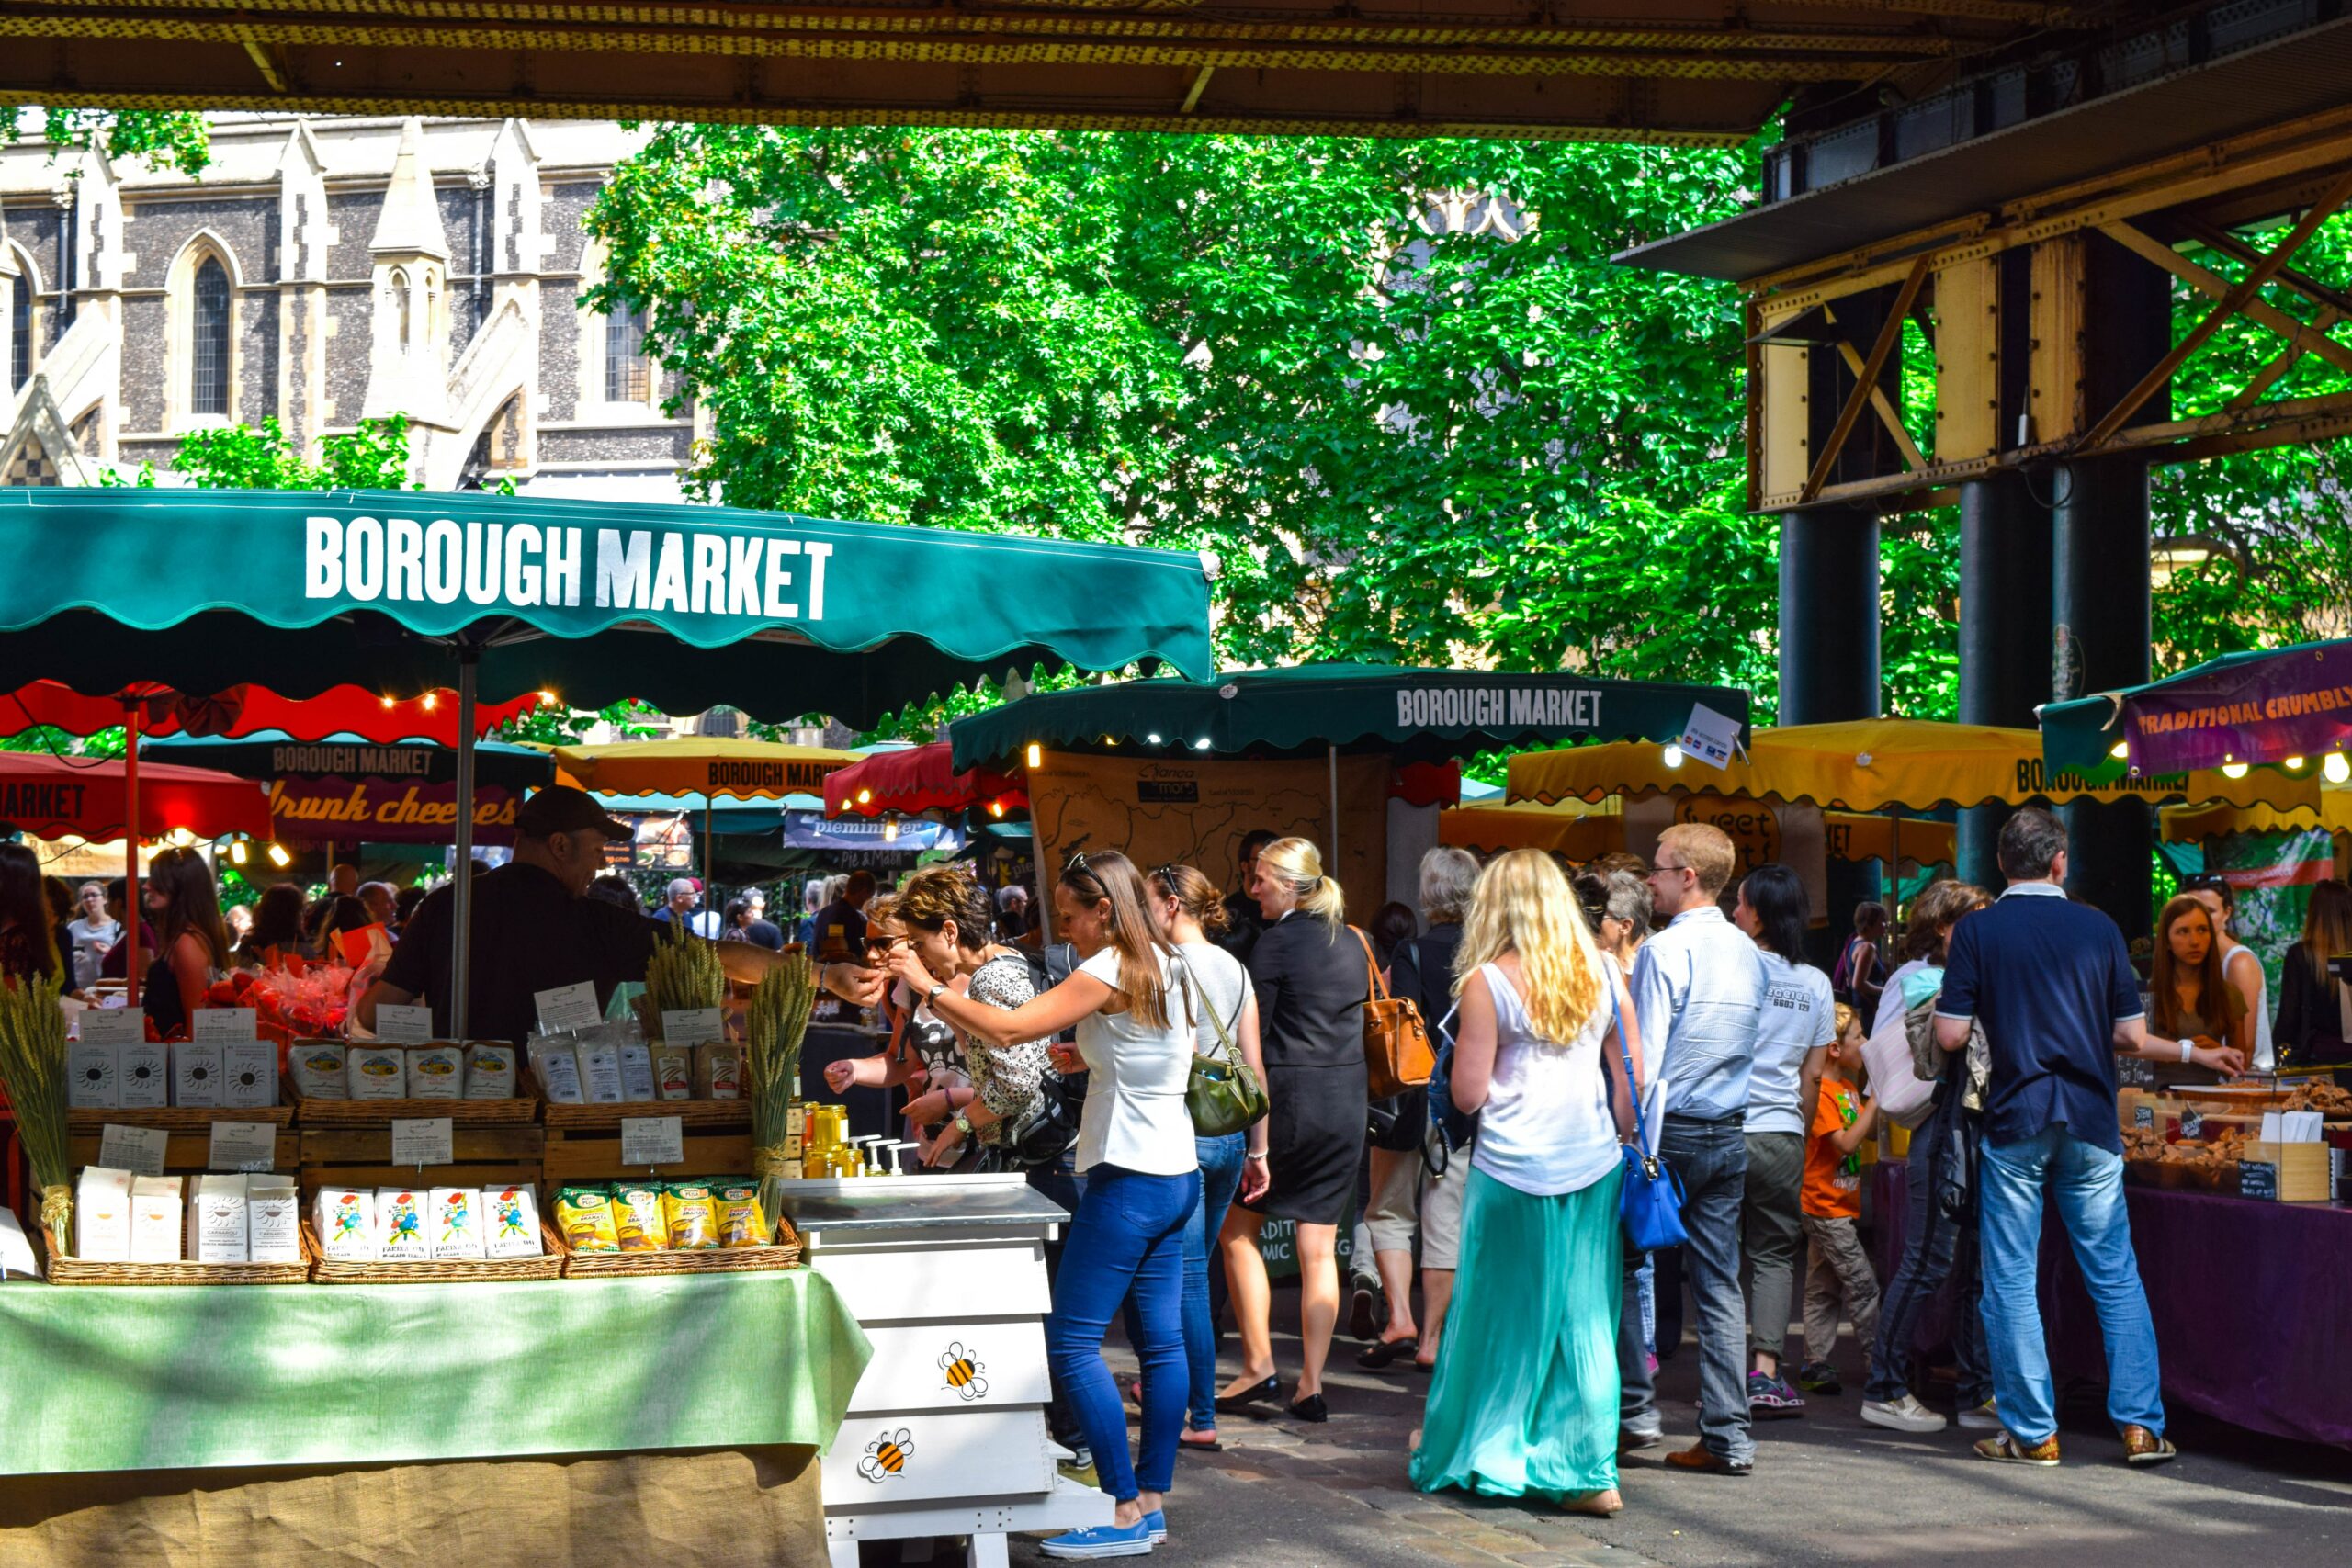 10 Tips for Selling at a Farmers Market